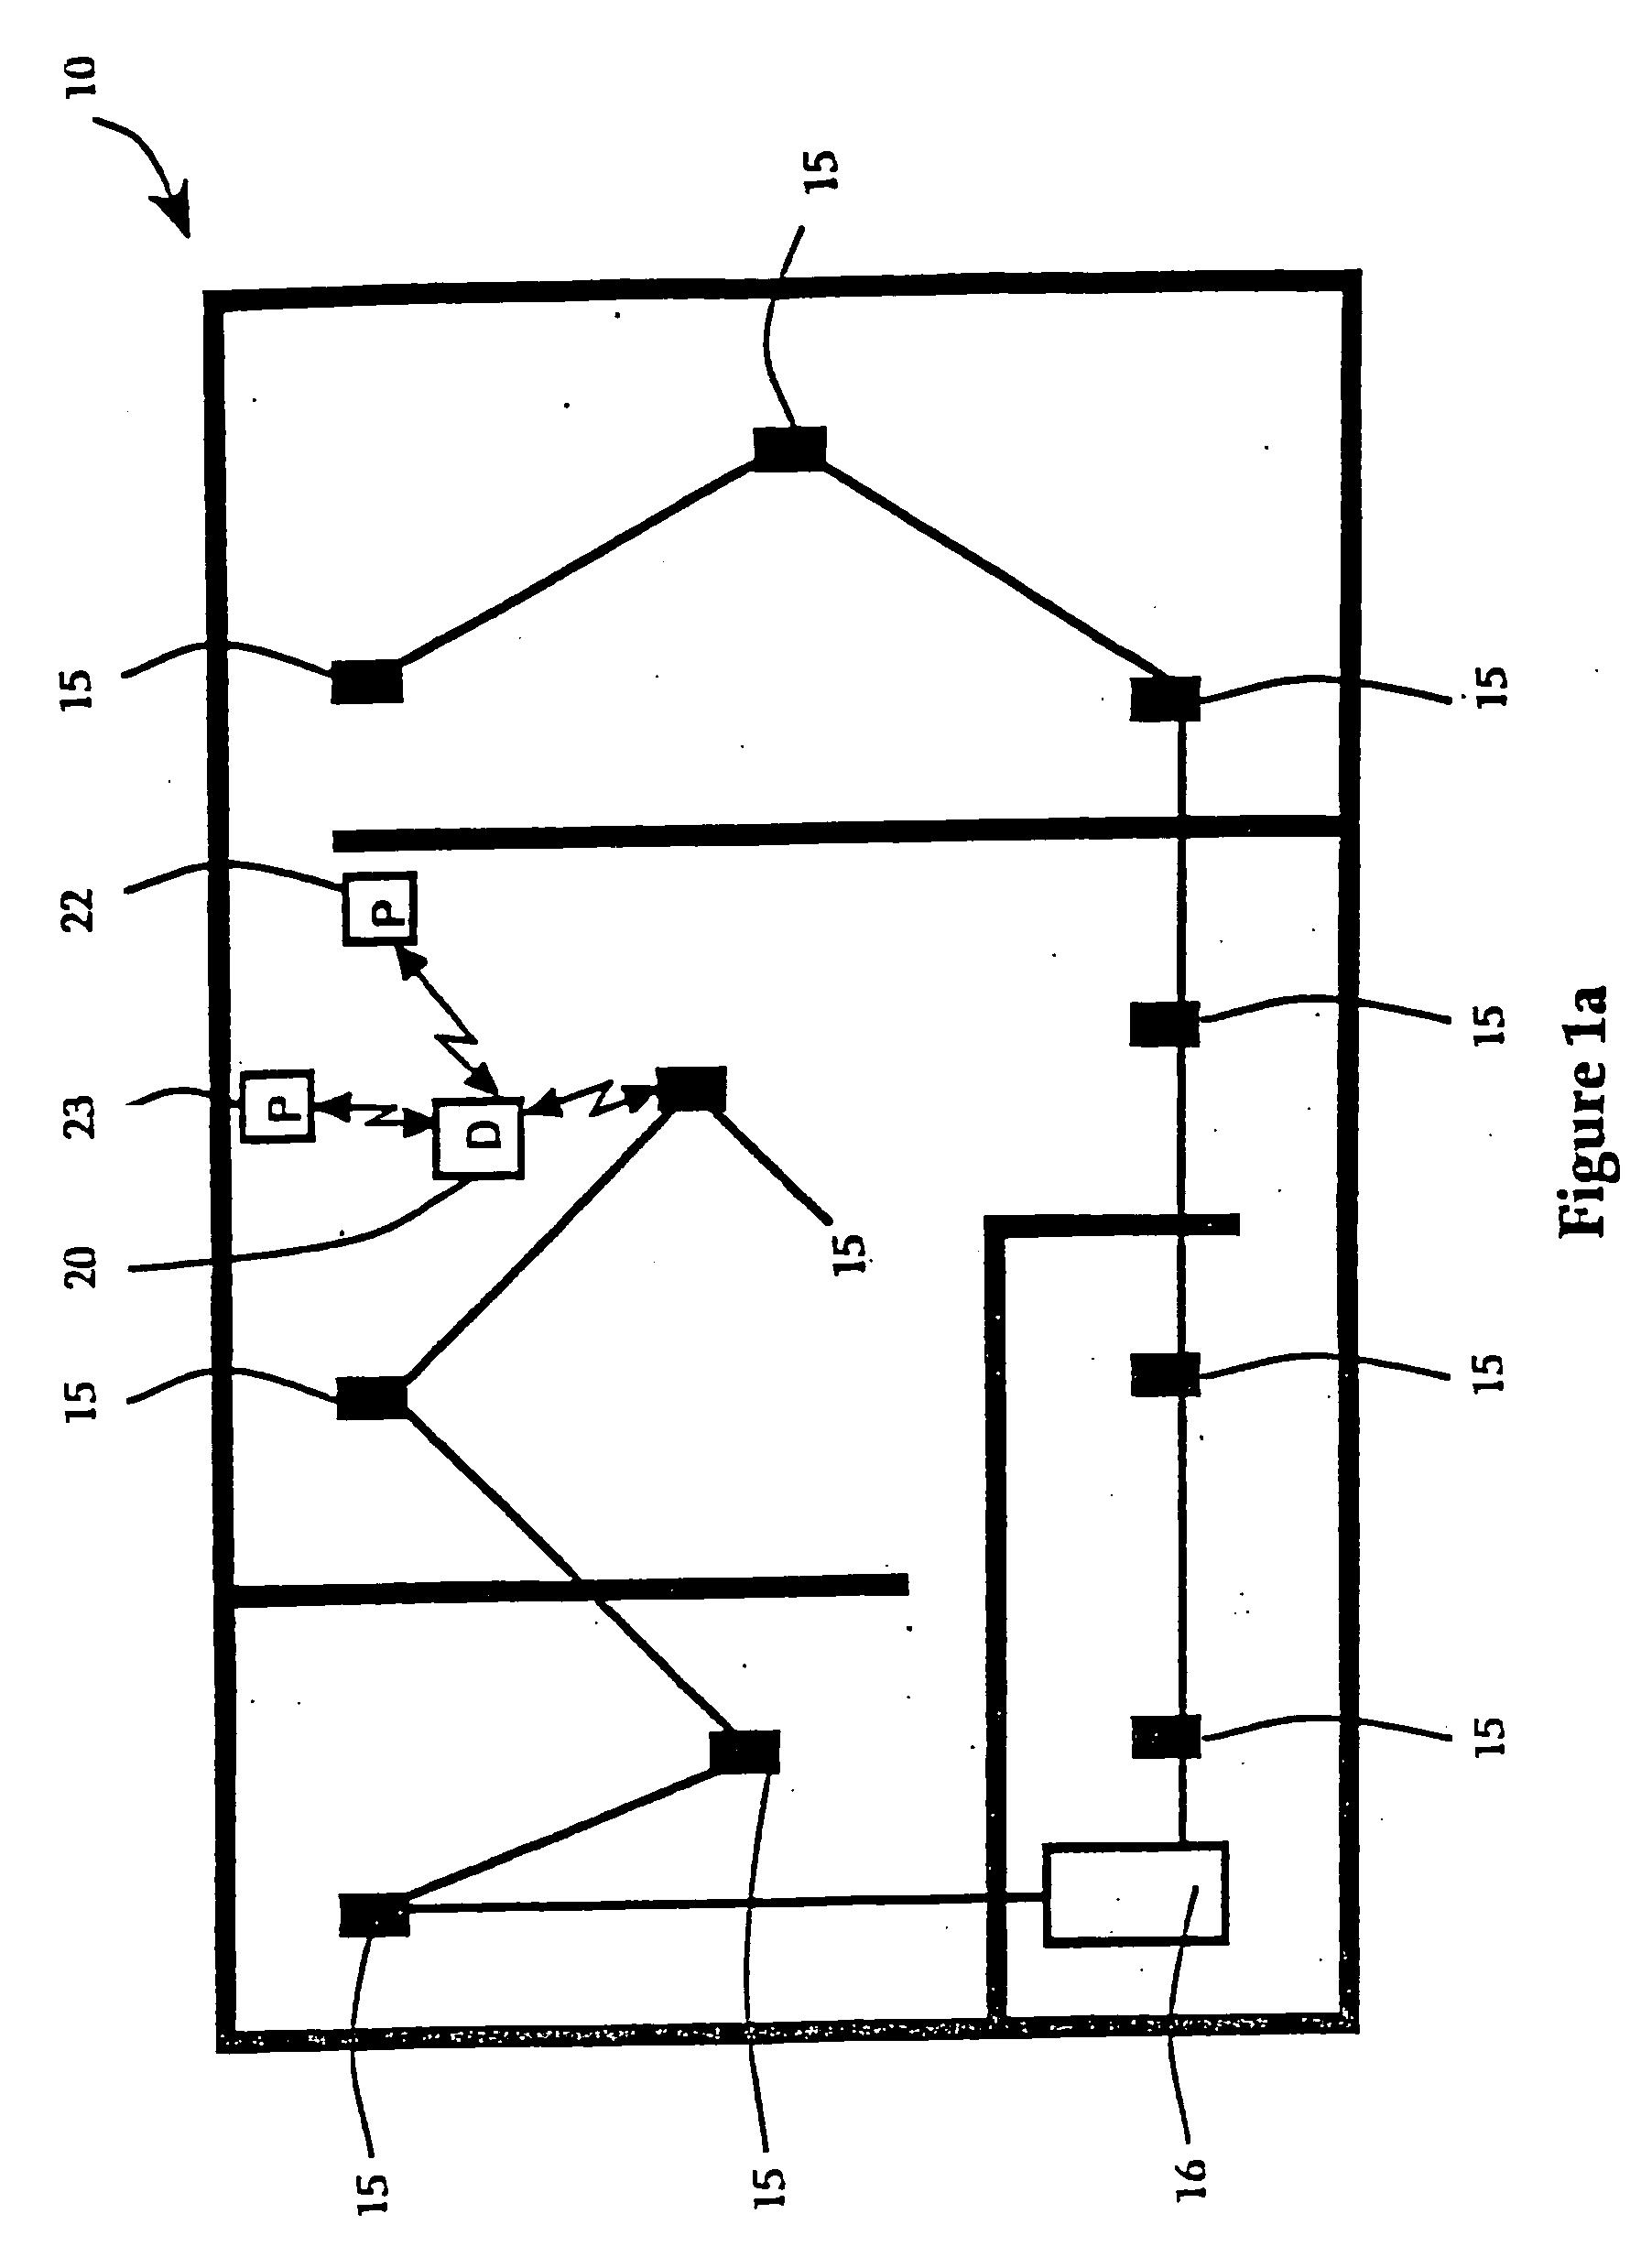 Hierarchical data collection network supporting packetized voice communications among wireless terminals and telephones